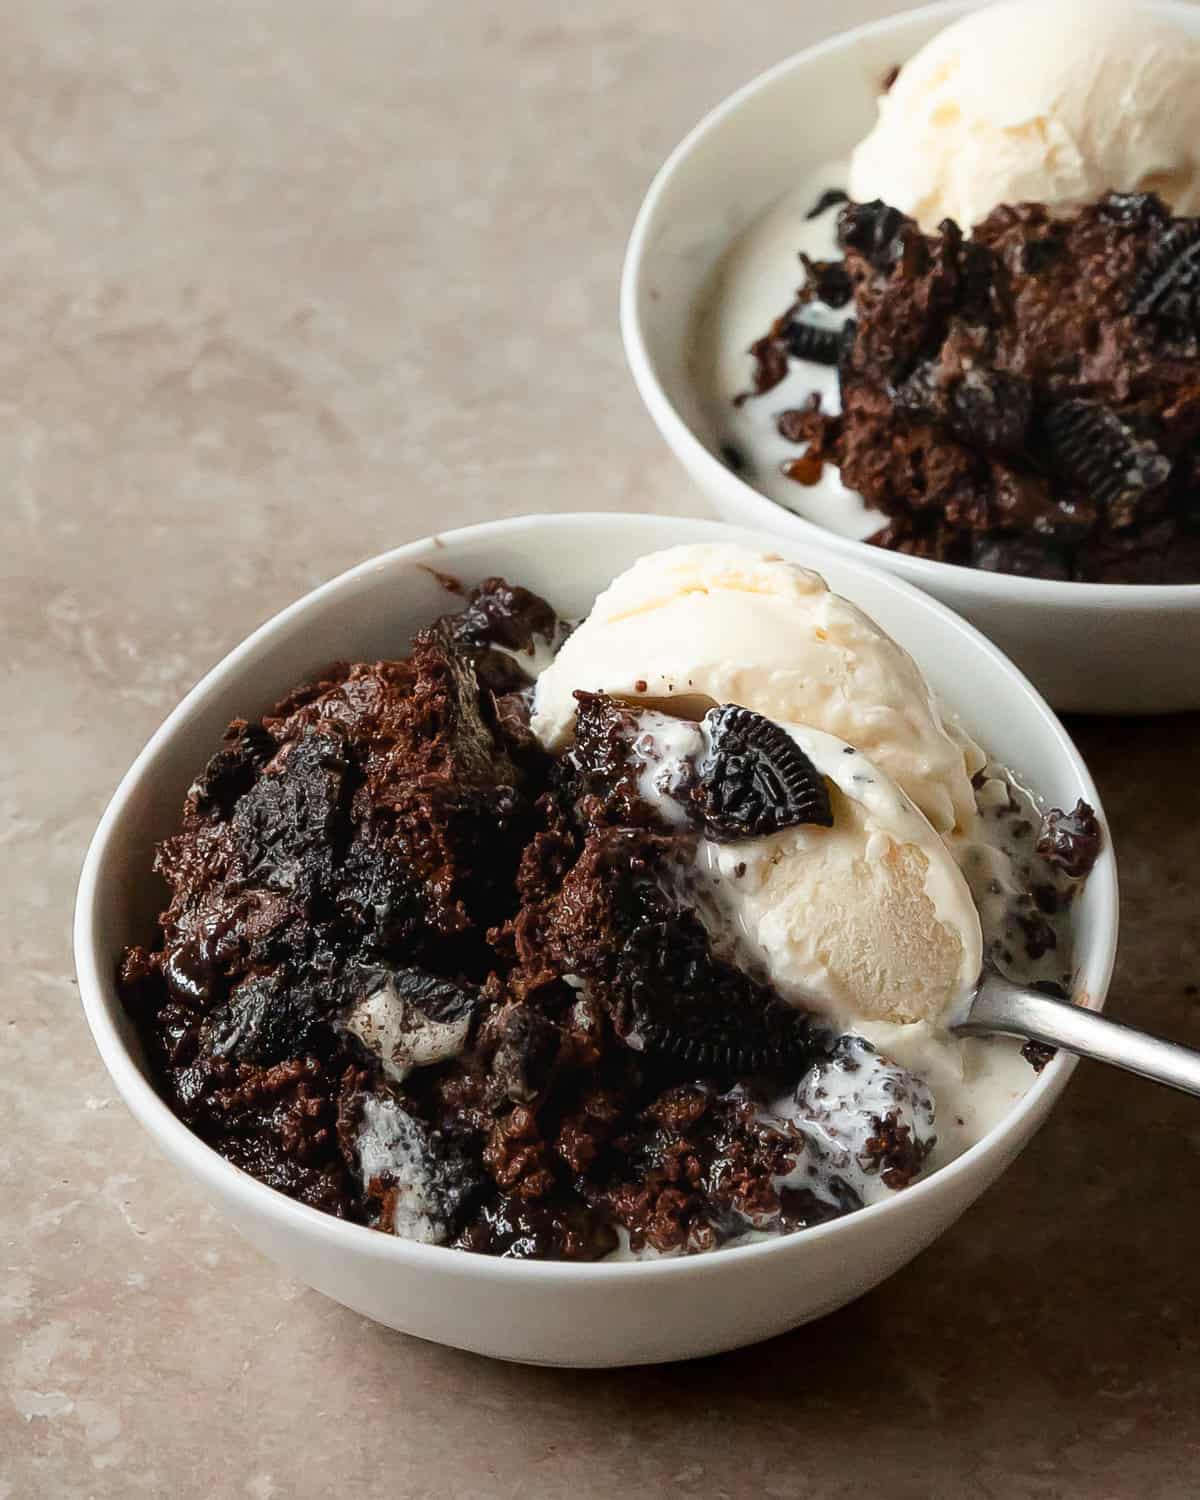 Oreo dump cake is a quick, easy to make, rich and chocolatey cookies and cream dessert. This Oreo dump cake recipe is made from 5 simple ingredients layered into a baking dish. Top this decadent Oreo cake with cold vanilla ice cream for the perfect one dish dessert.  